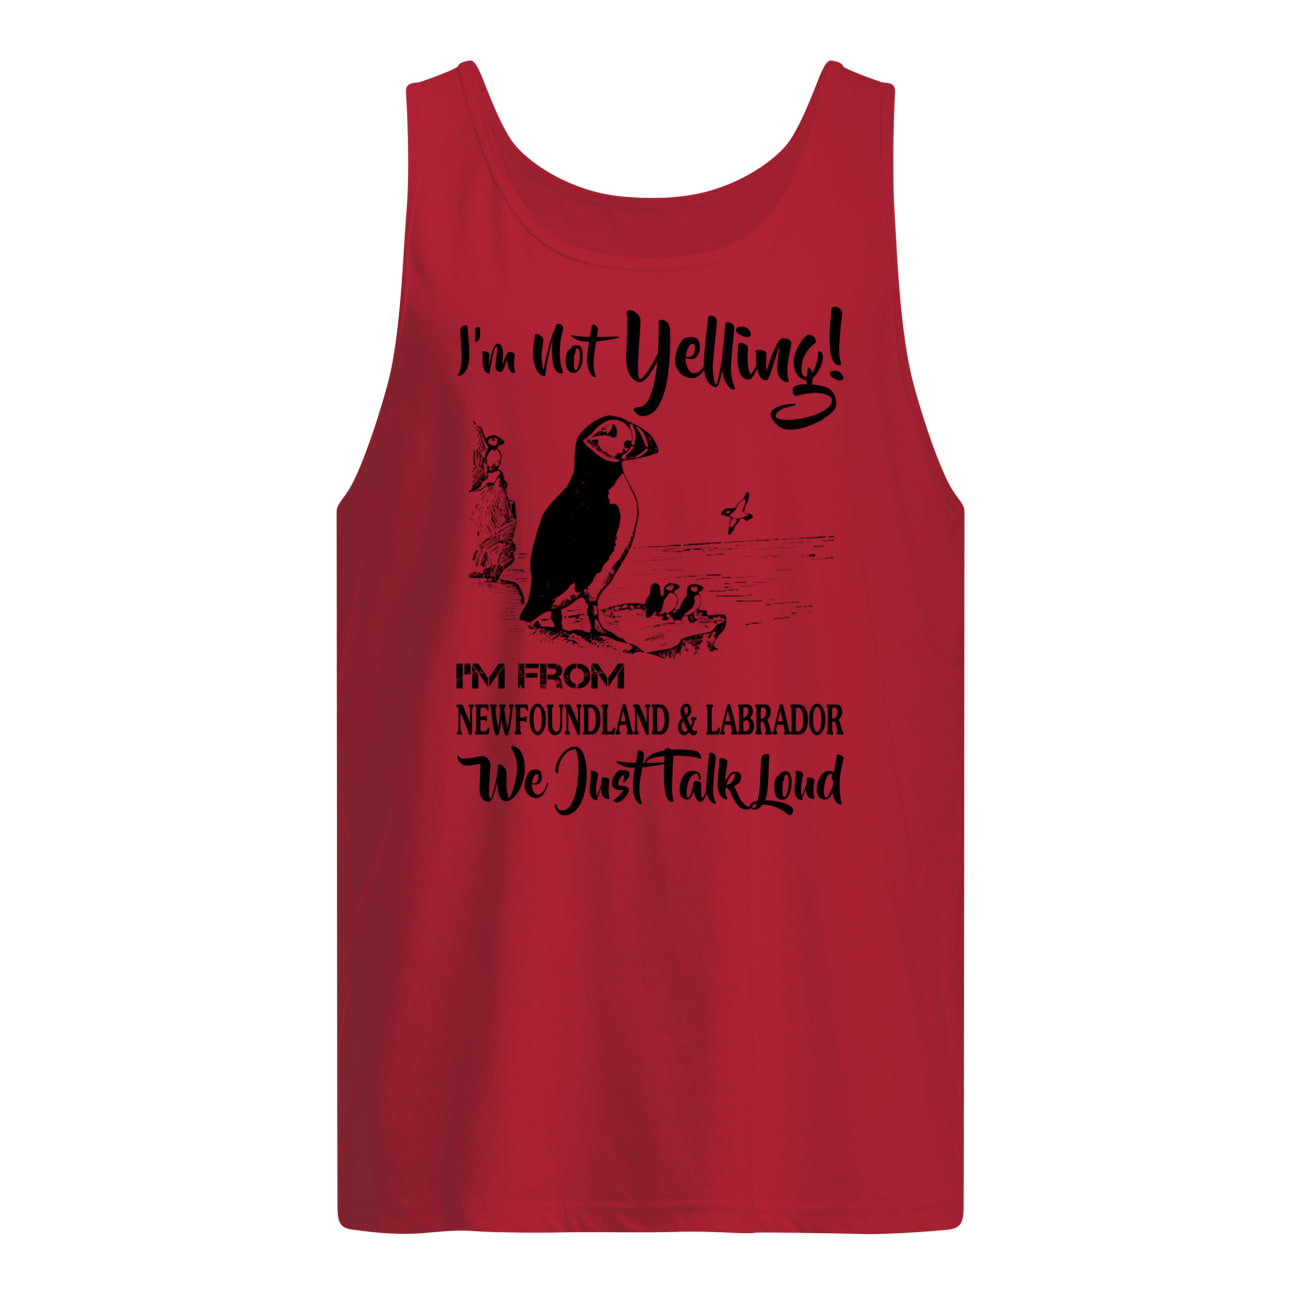 I'm not yelling i'm from newfoundland and labrador tank top